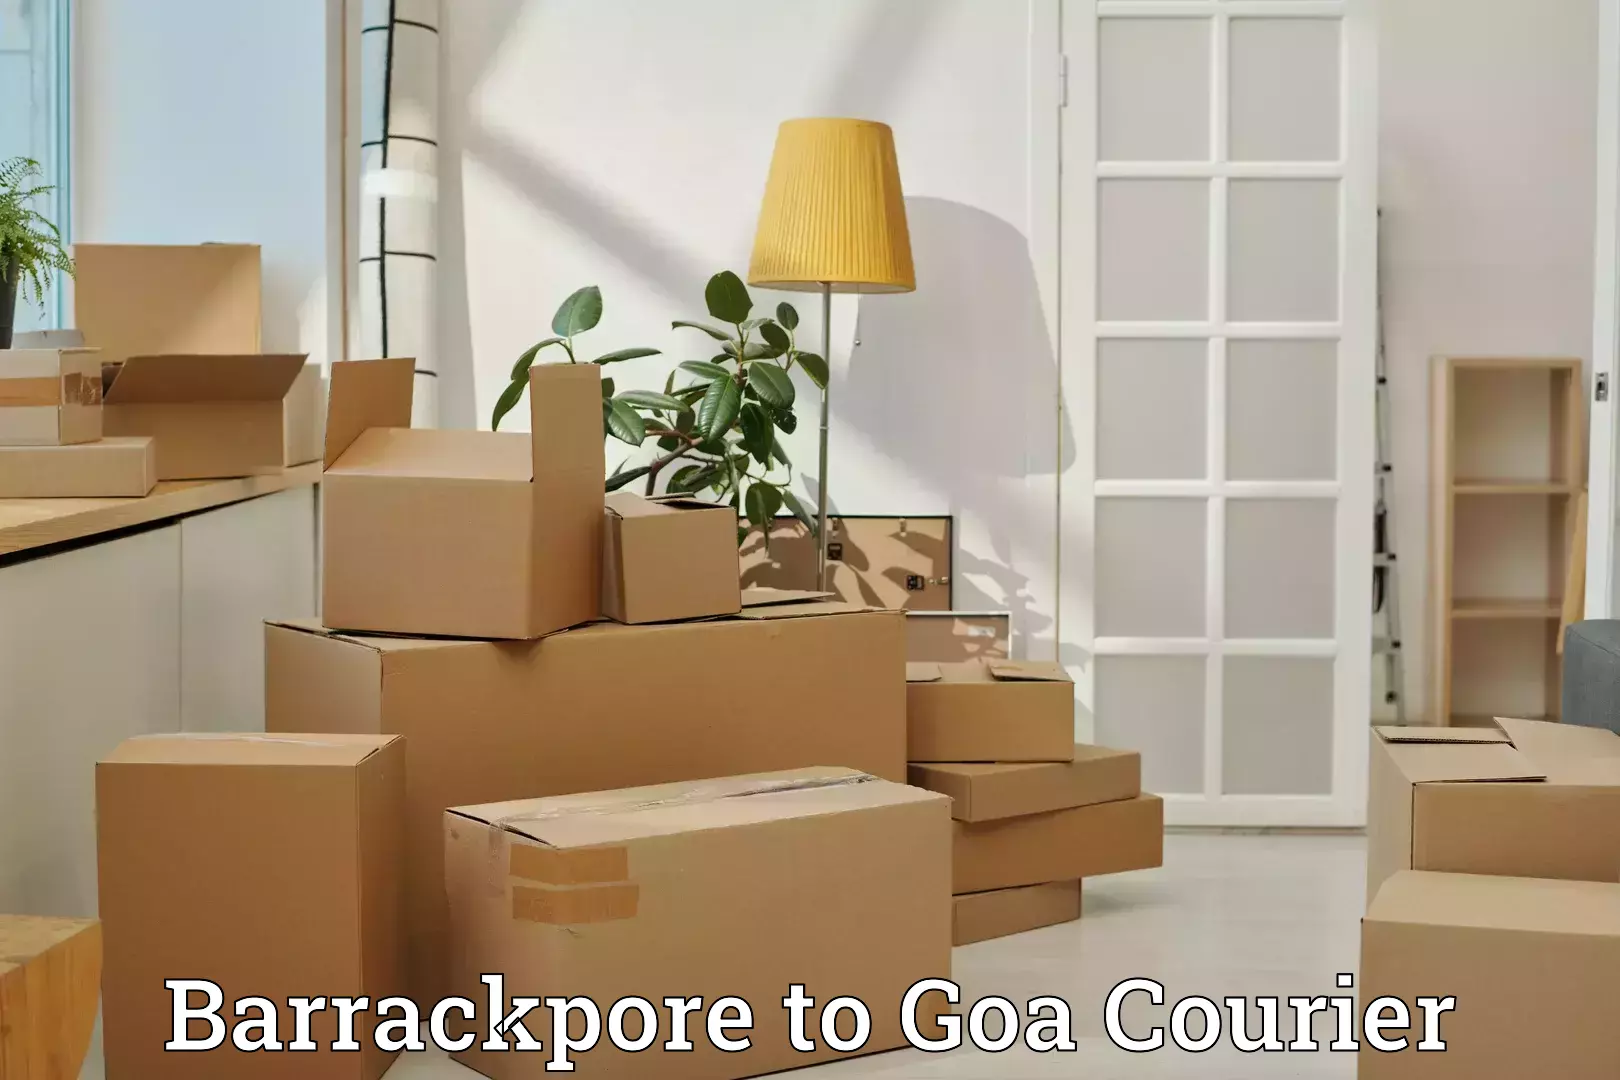 Luggage shipment specialists Barrackpore to Goa